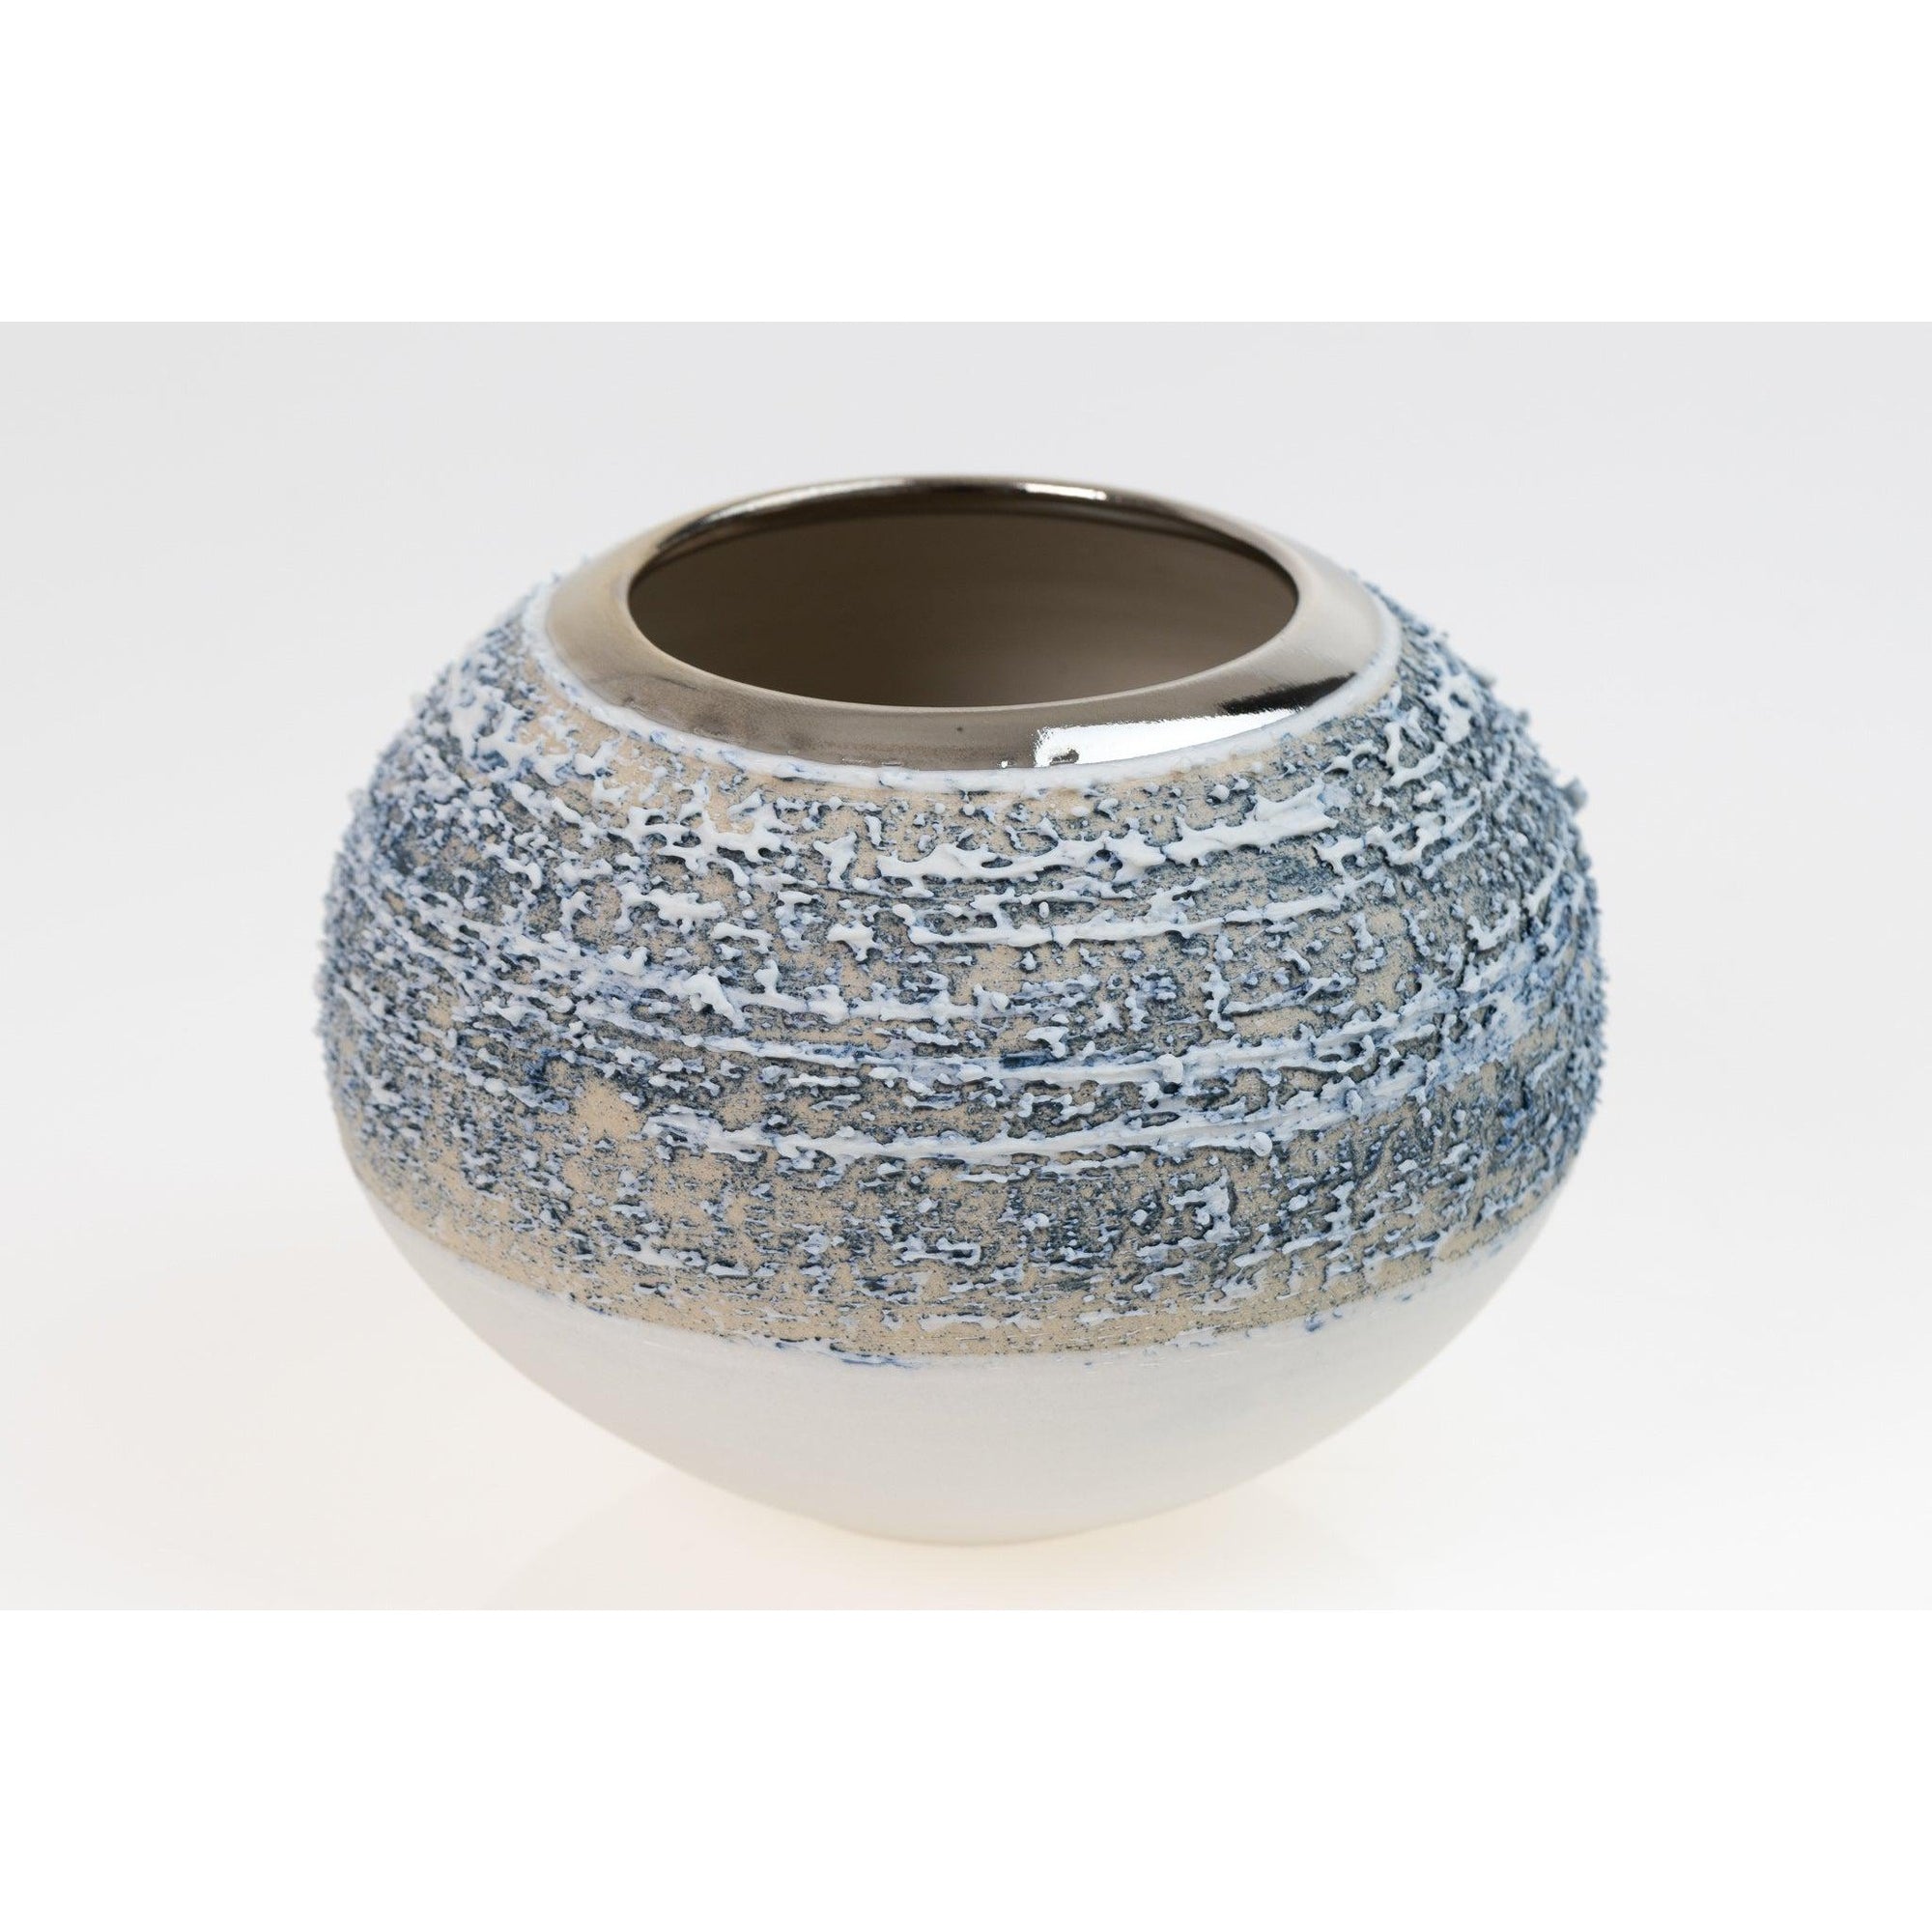 PGX24 Zephyr Textured Orb with Platinum Lustre by Alex McCarthy, available at Padstow Gallery, Cornwall